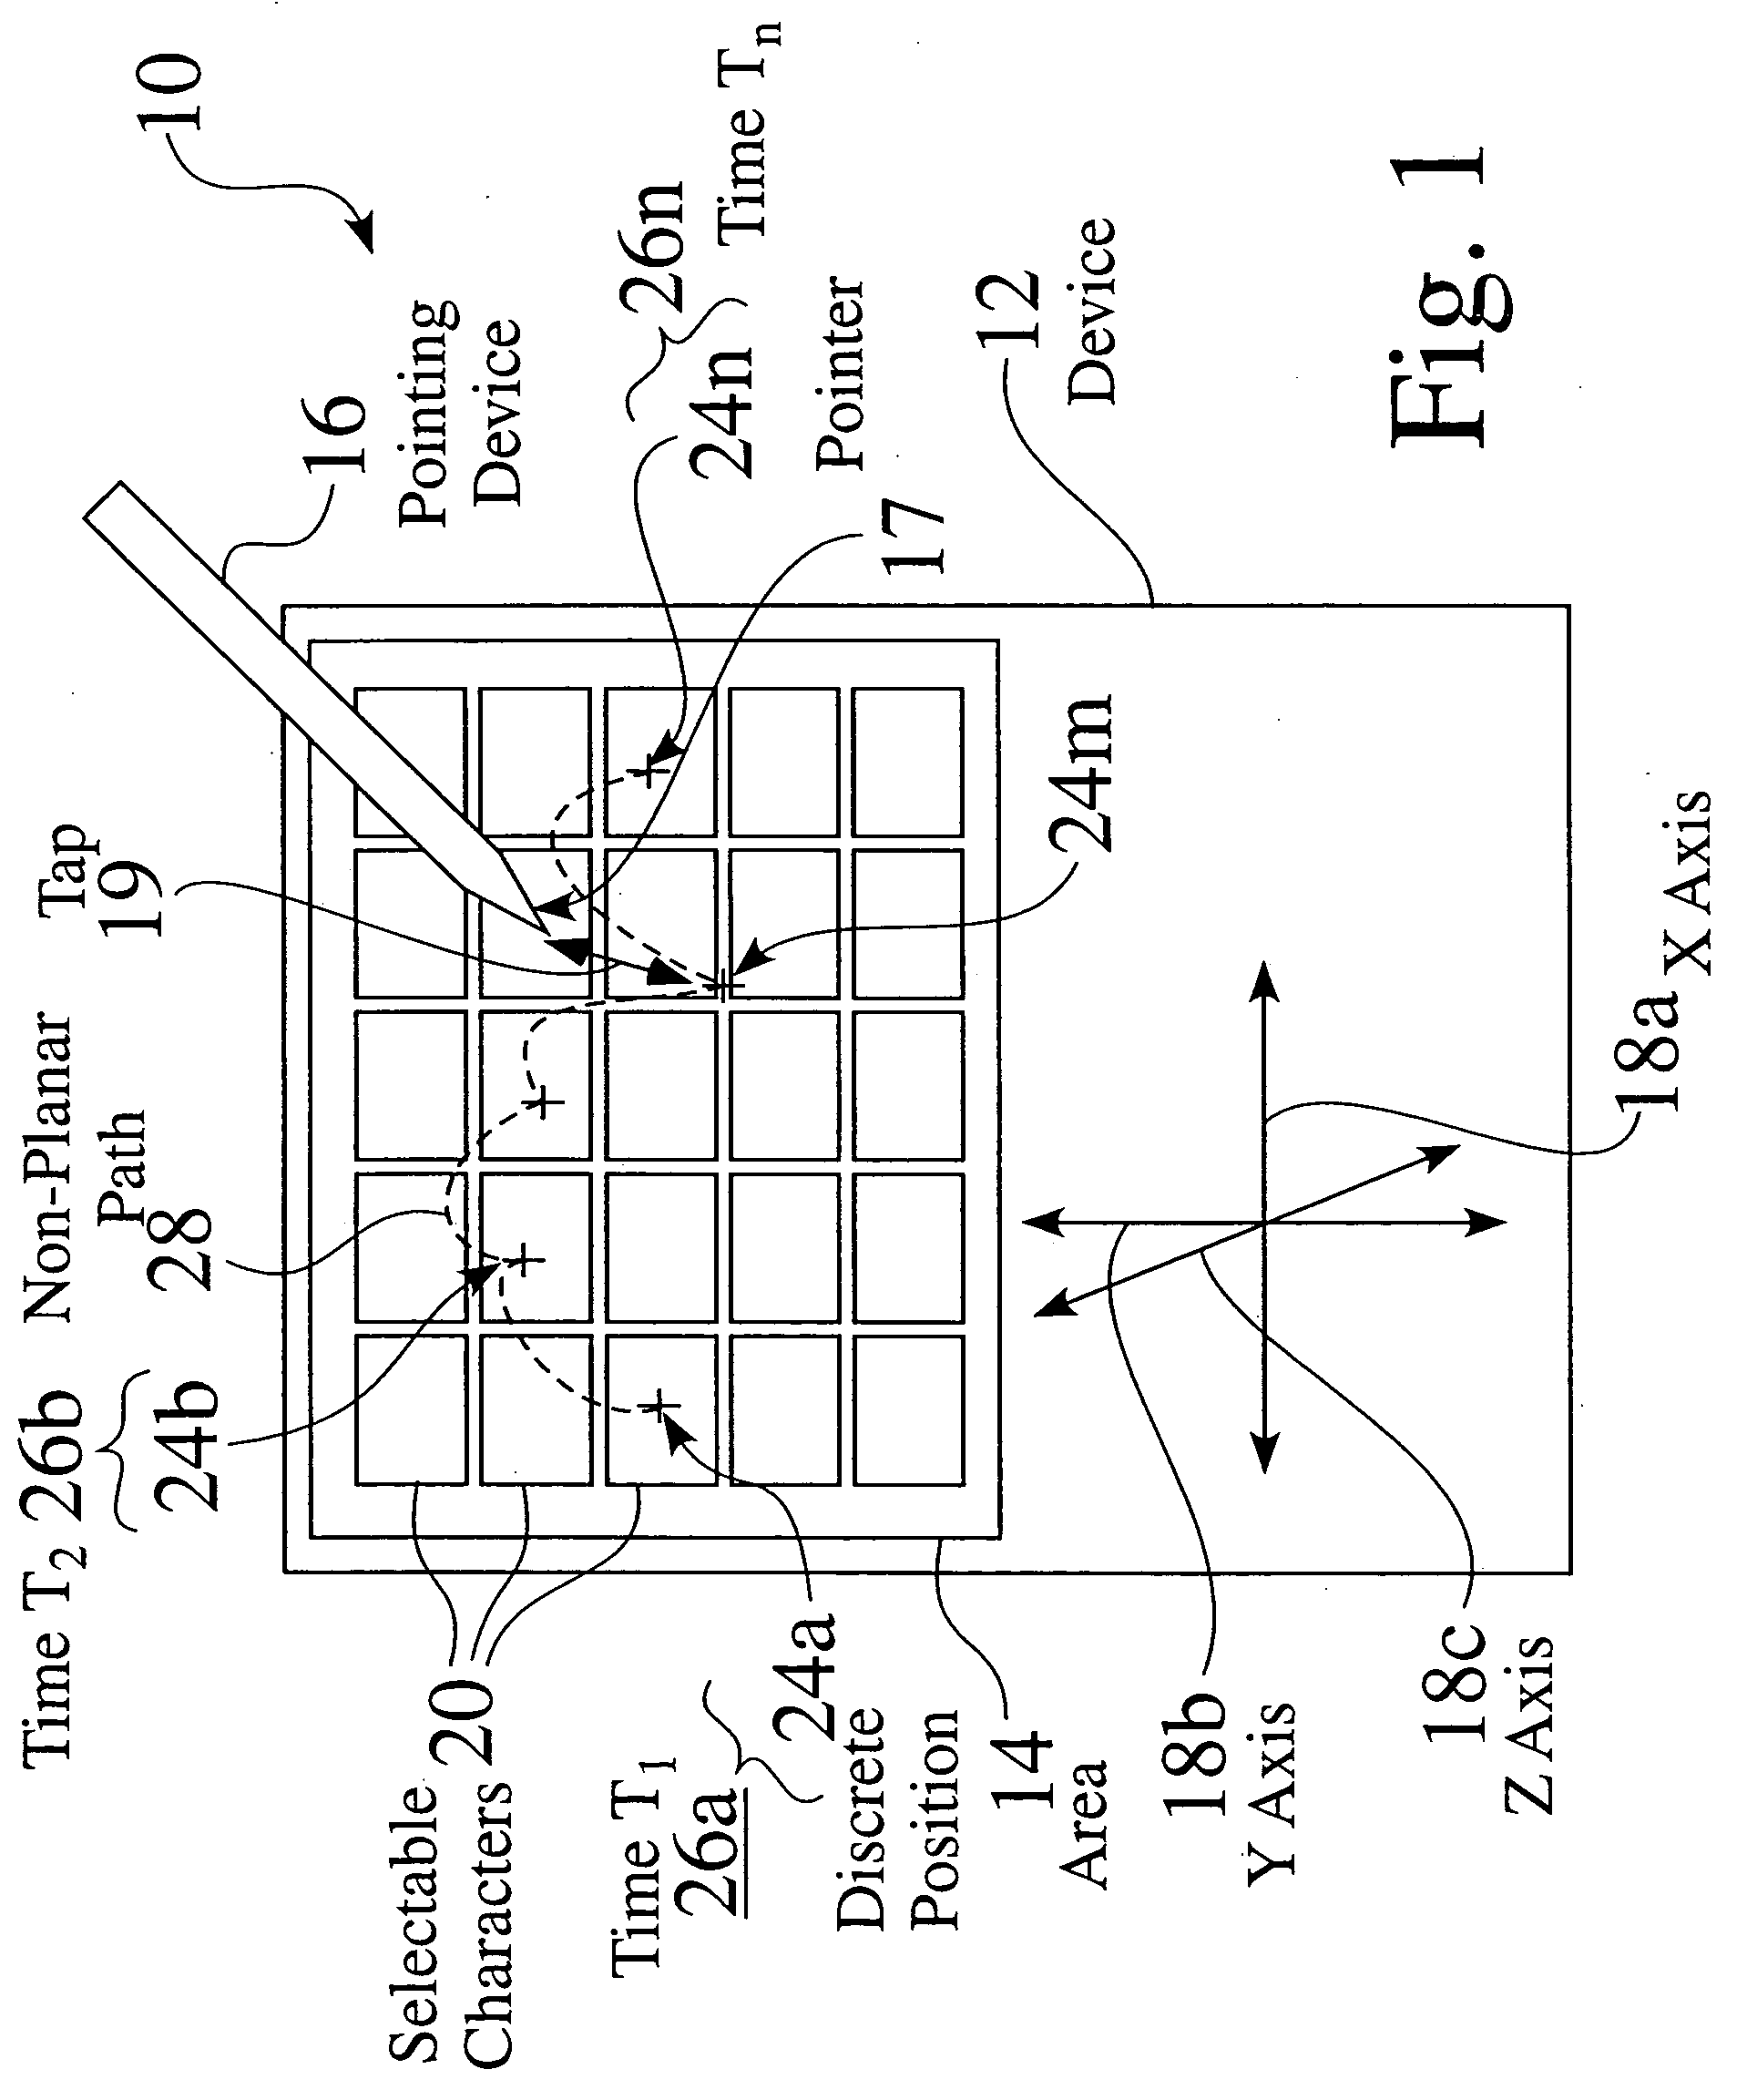 Selective input system based on tracking of motion parameters of an input device